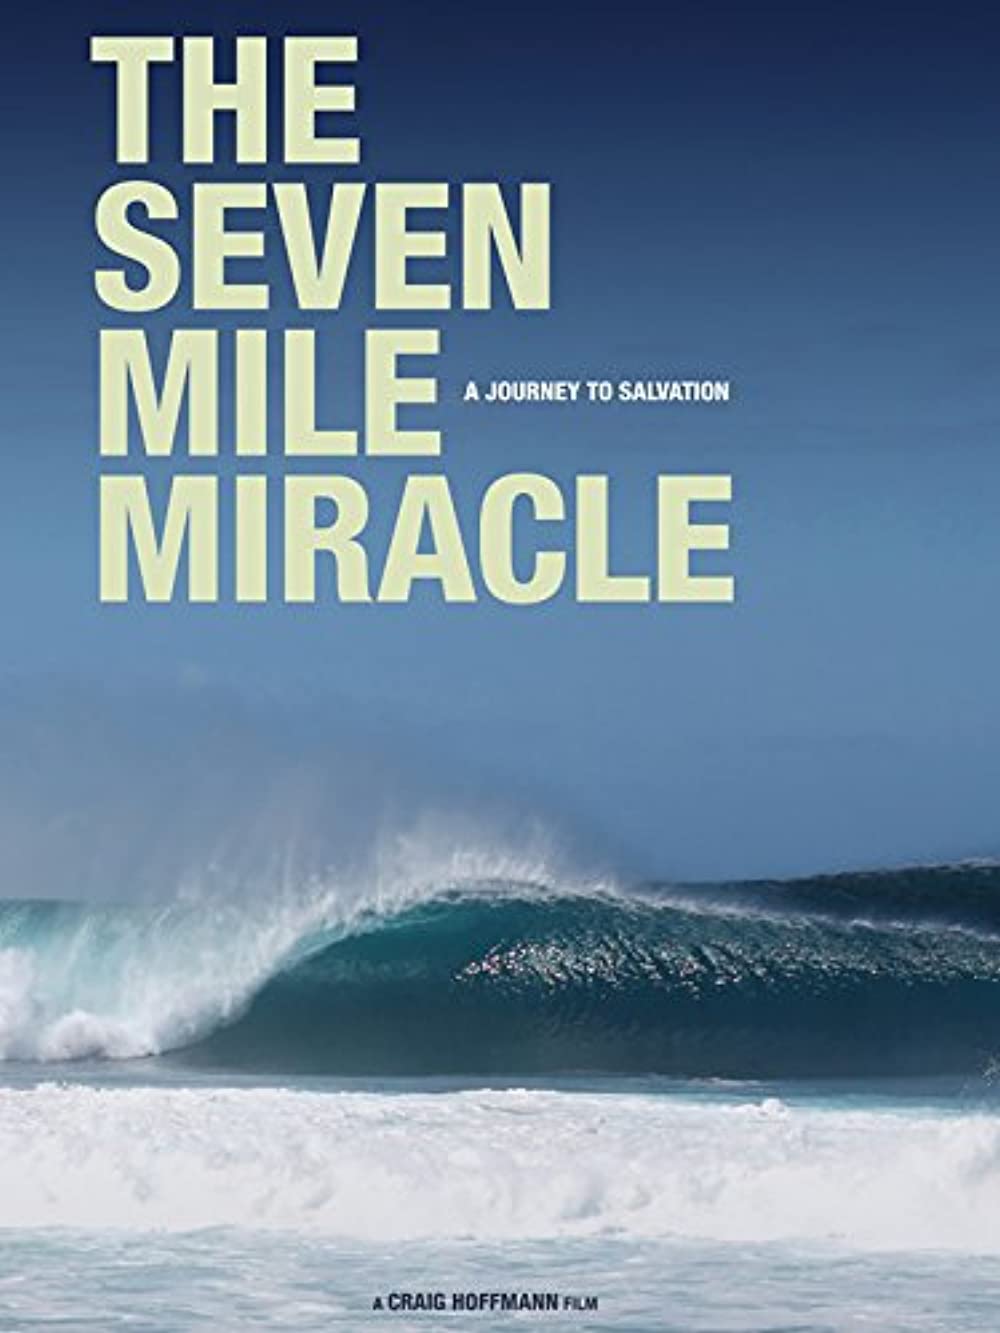 Download The Seven Mile Miracle Movie | The Seven Mile Miracle Dvd